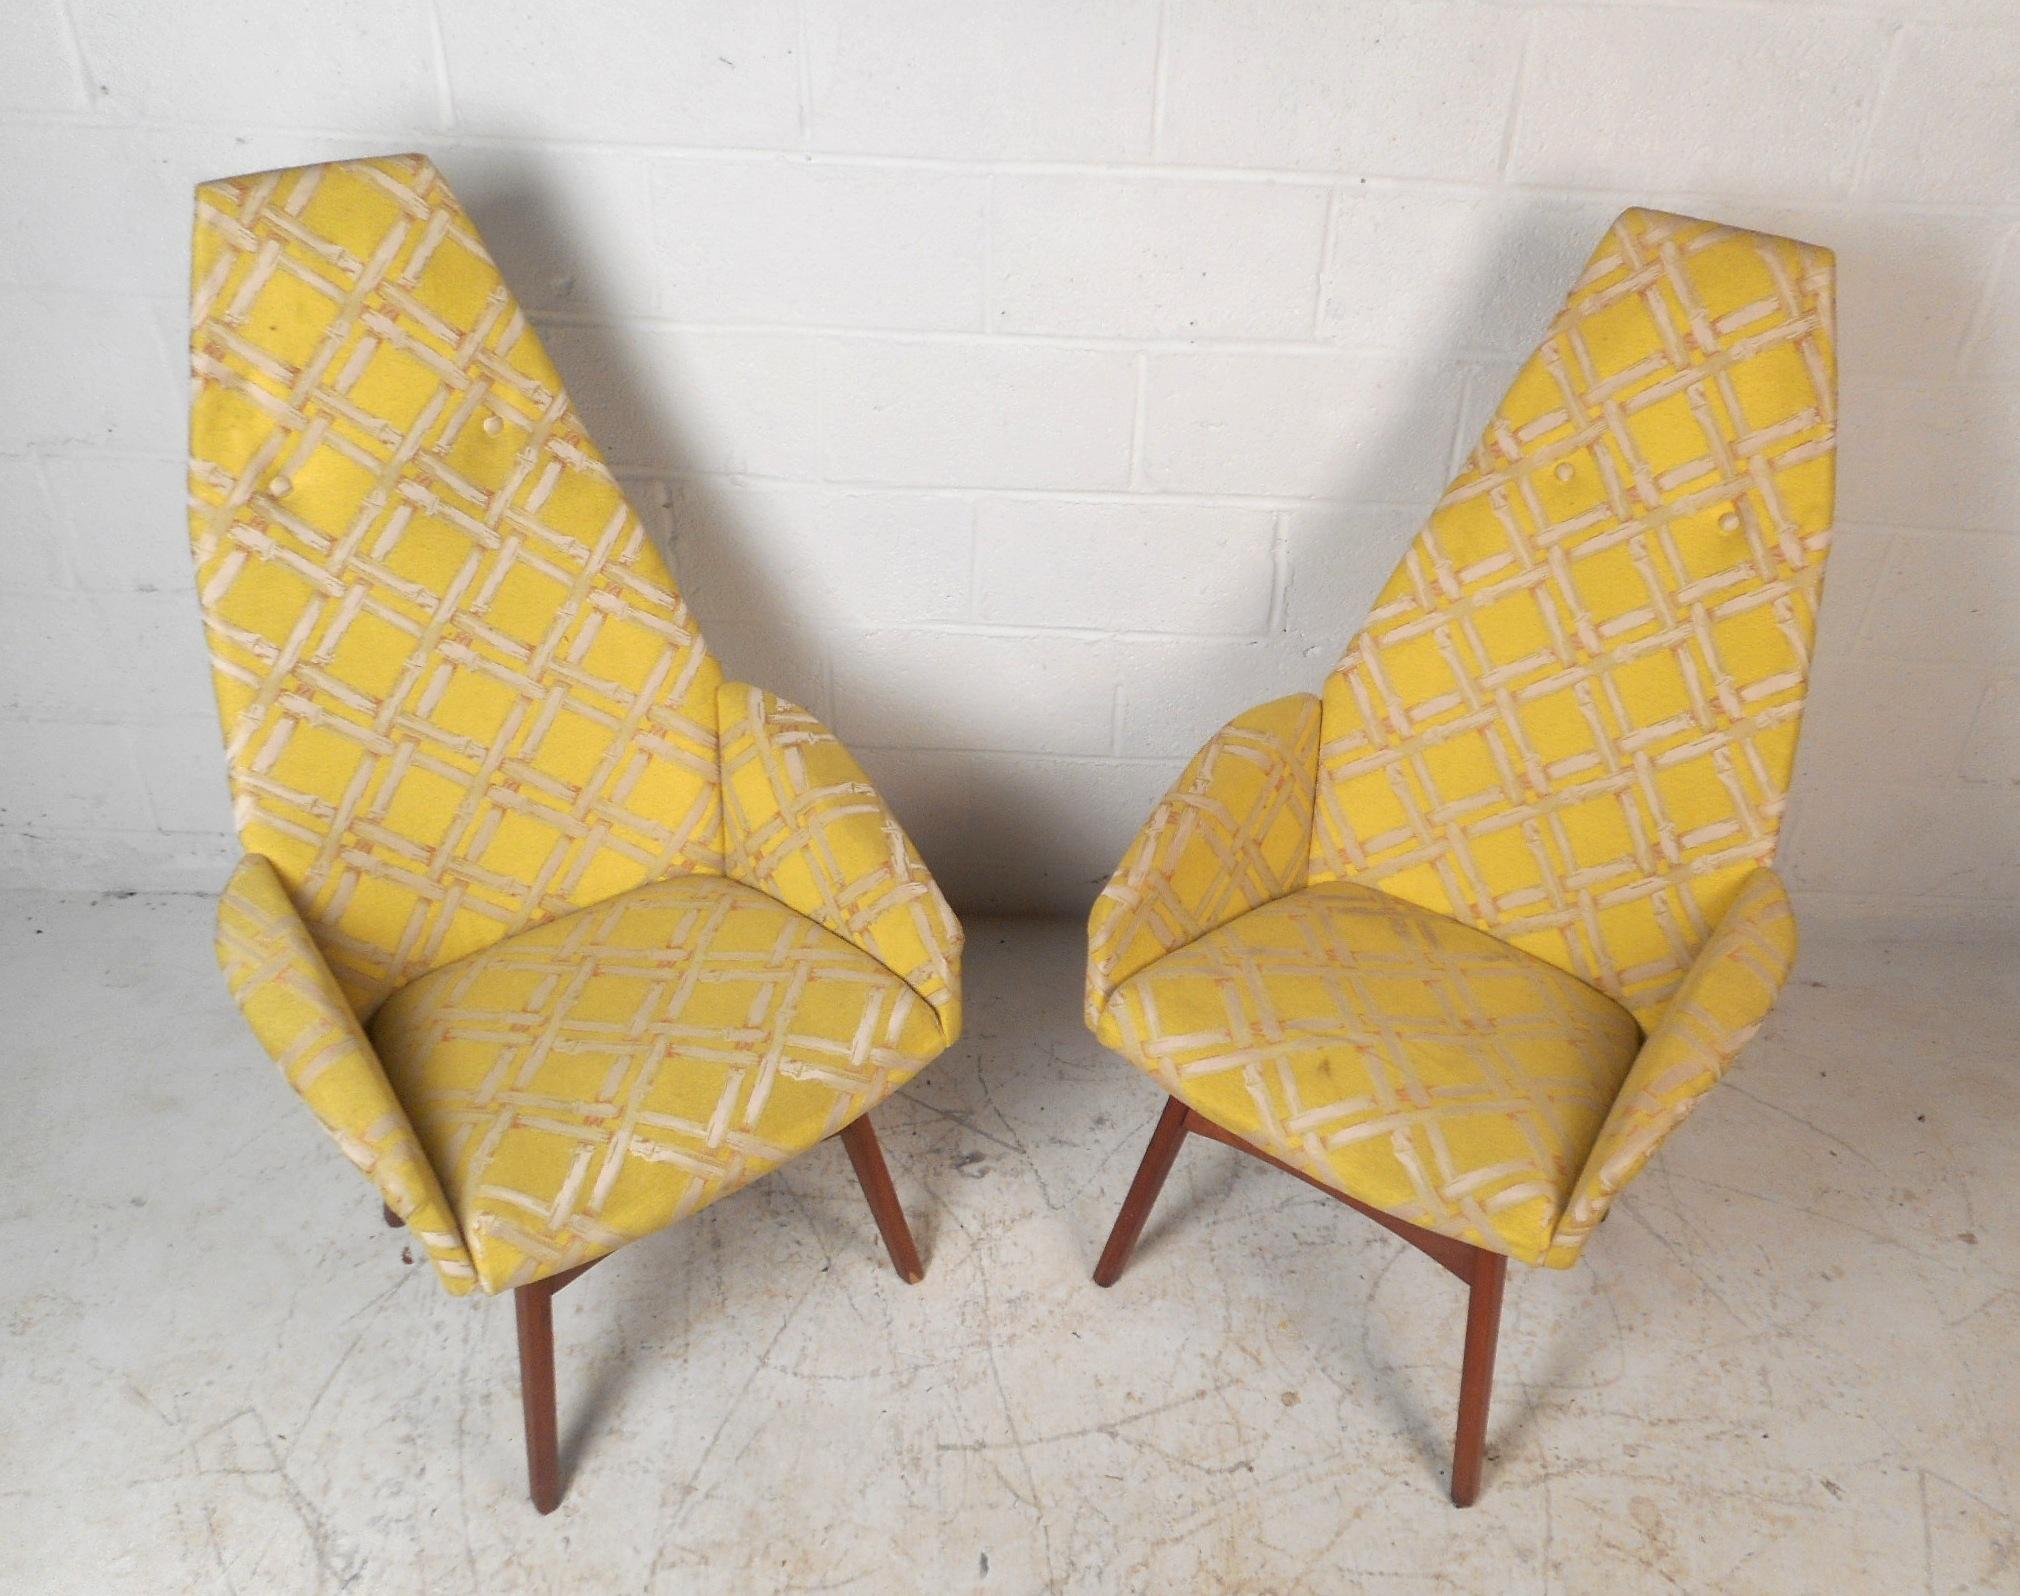 This beautiful pair of vintage modern lounge chairs feature winged arm rests, splayed legs, and a high back rest. A decorative yellow upholstery and sturdy walnut base add to the allure. This comfortable and sleek pair of his/hers Adrian Pearsall